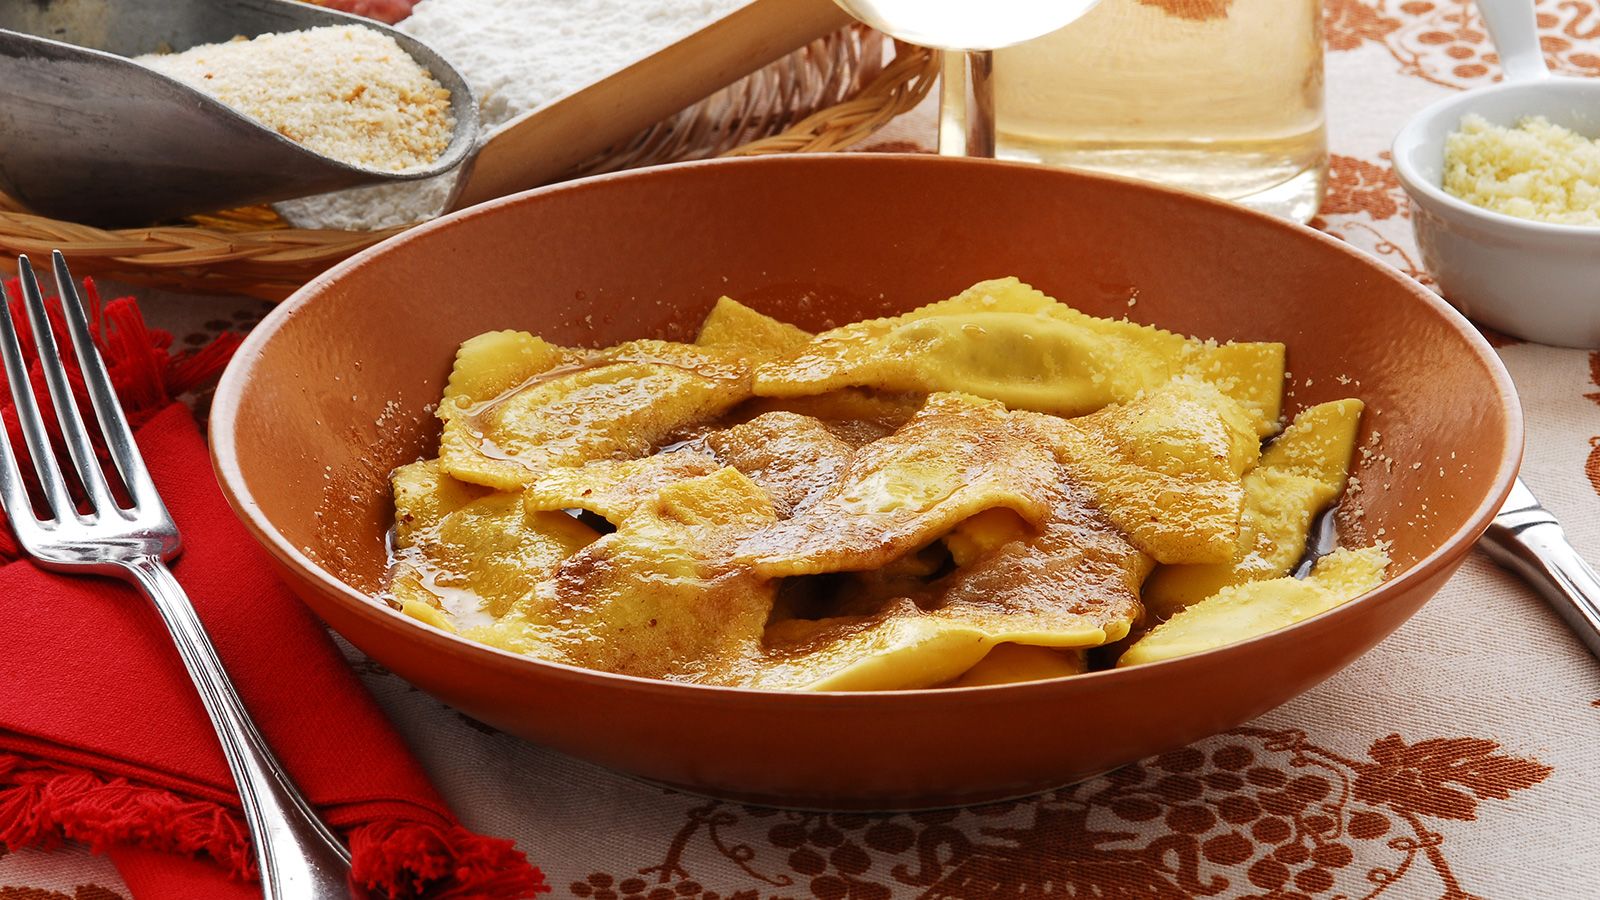 <strong>Potato-potahto: </strong>Whether you call them casoncelli or casoncei, this butter-drenched stuffed pasta is one of Lombardy's tastiest dishes.